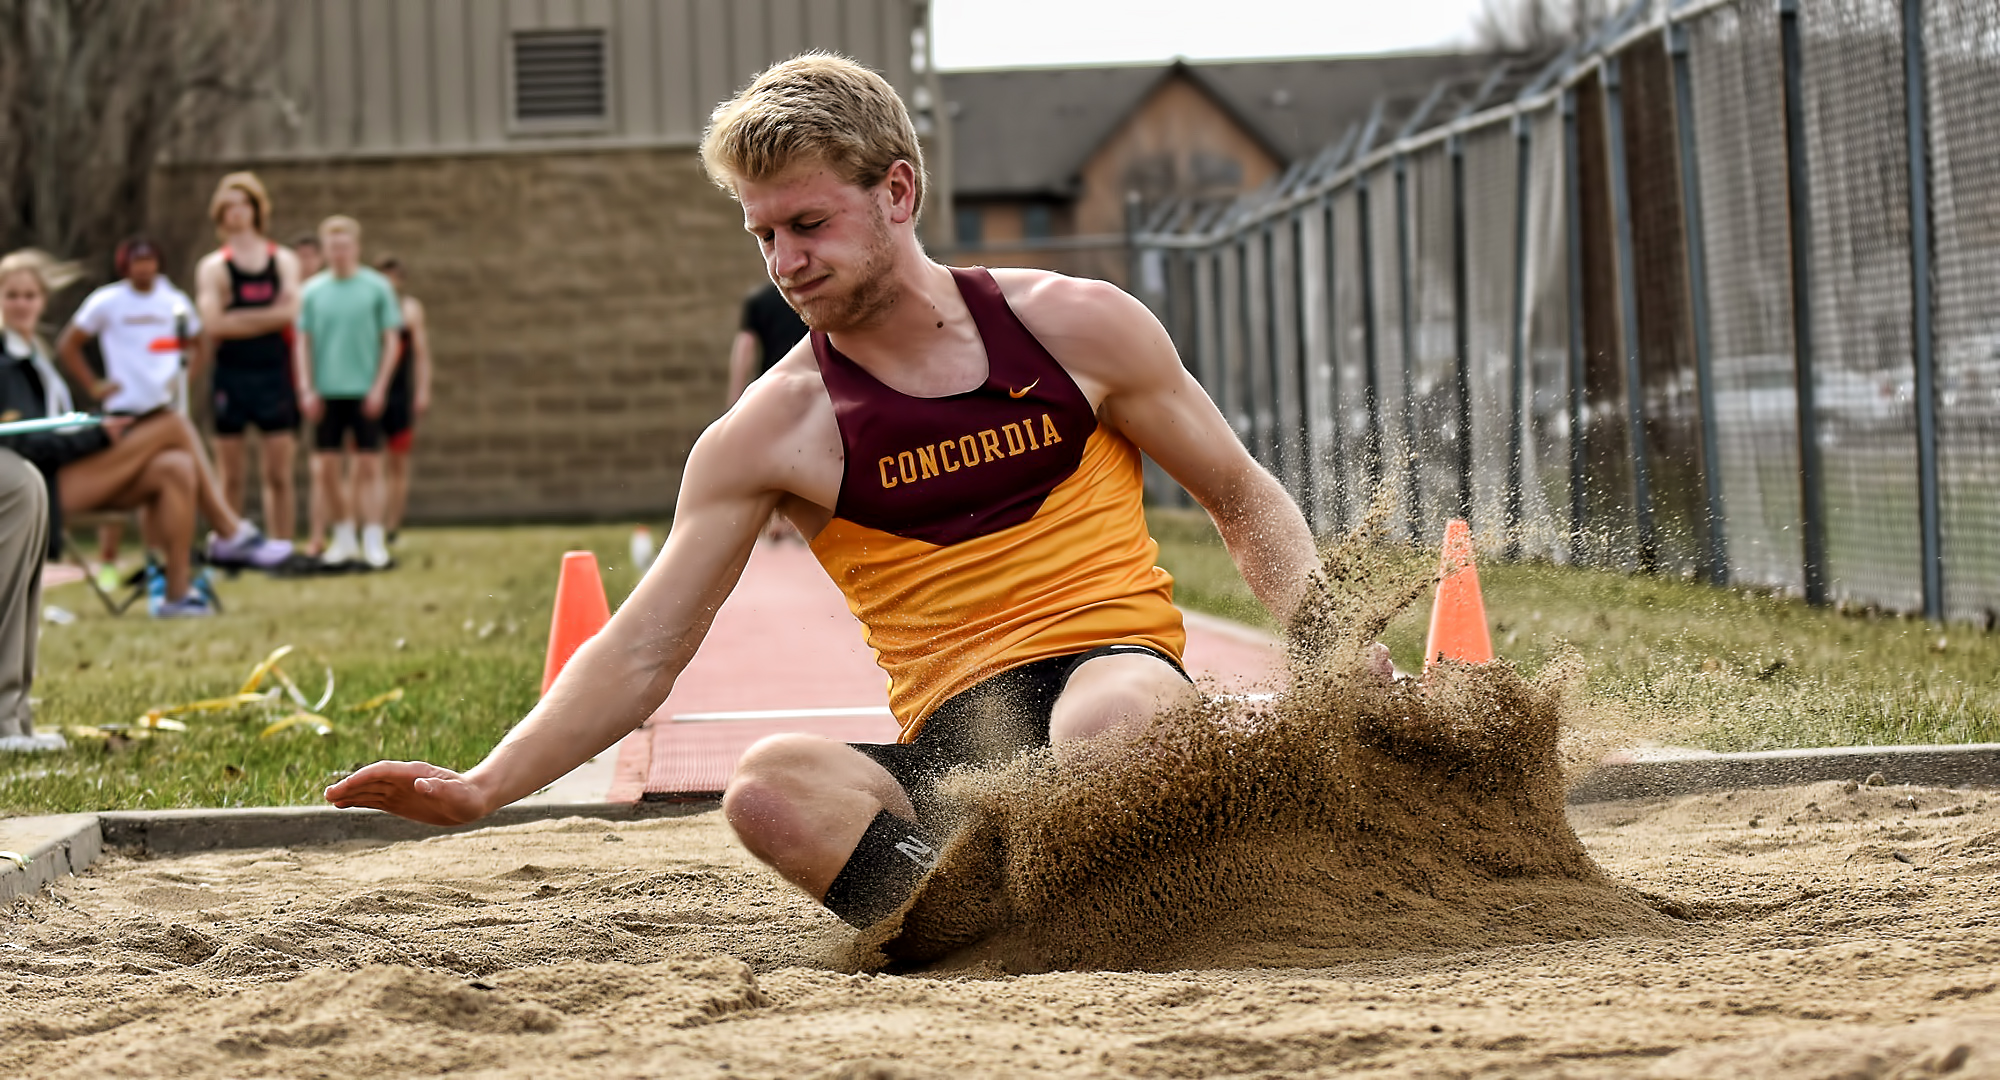 Matt Bye became the seventh Cobber athlete to win the MIAC decathlon with a personal best score of 6,586 points.